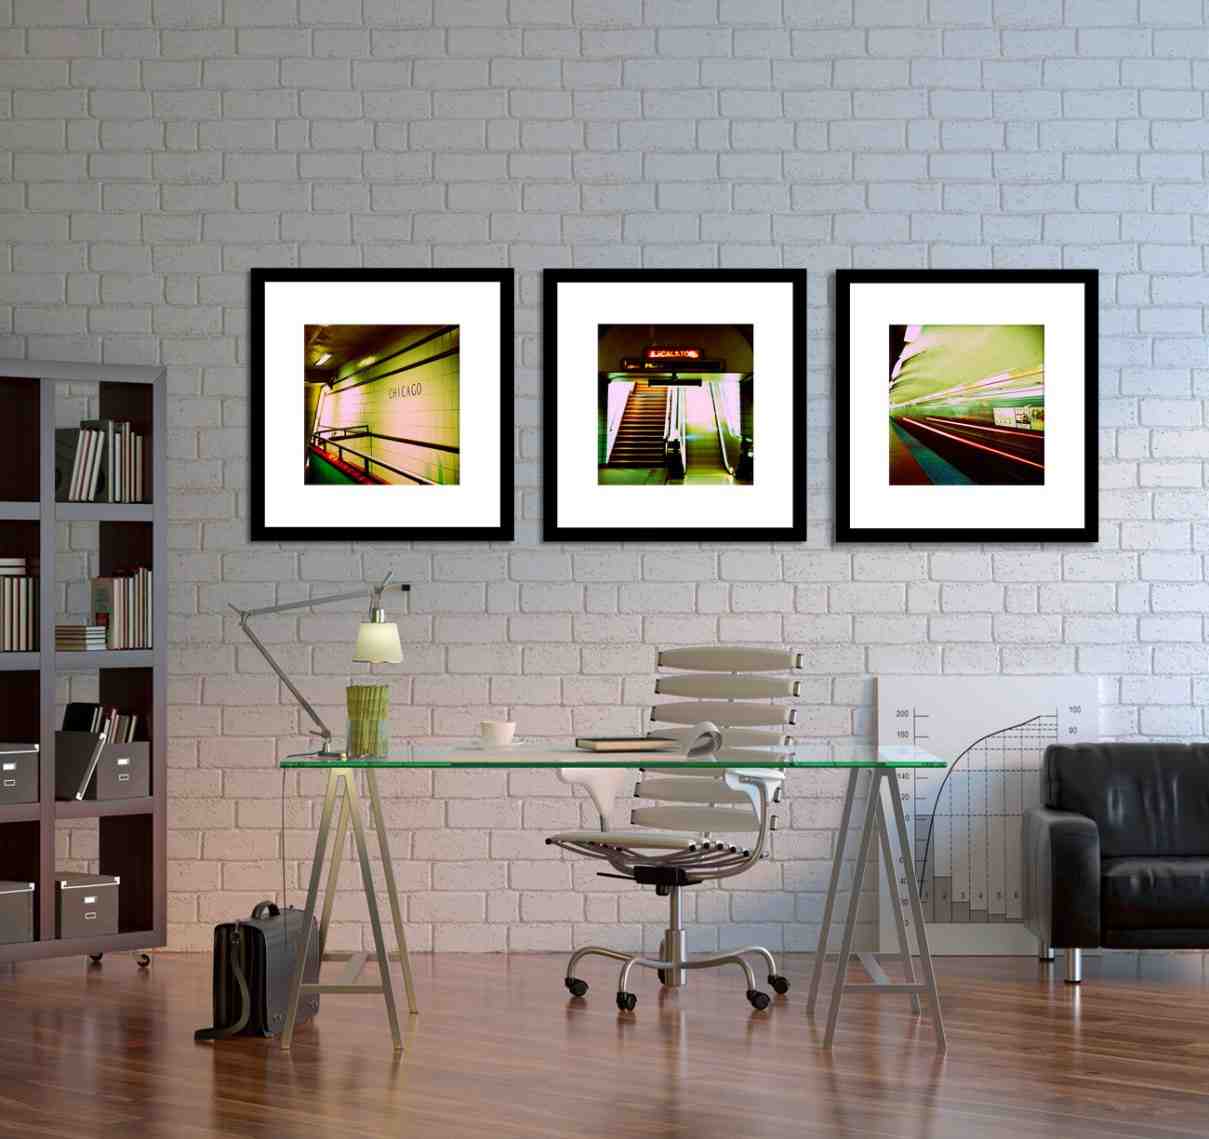 office decor wall decorating chicago decoration subway abstract workspace oficina frame decorations desde guardado